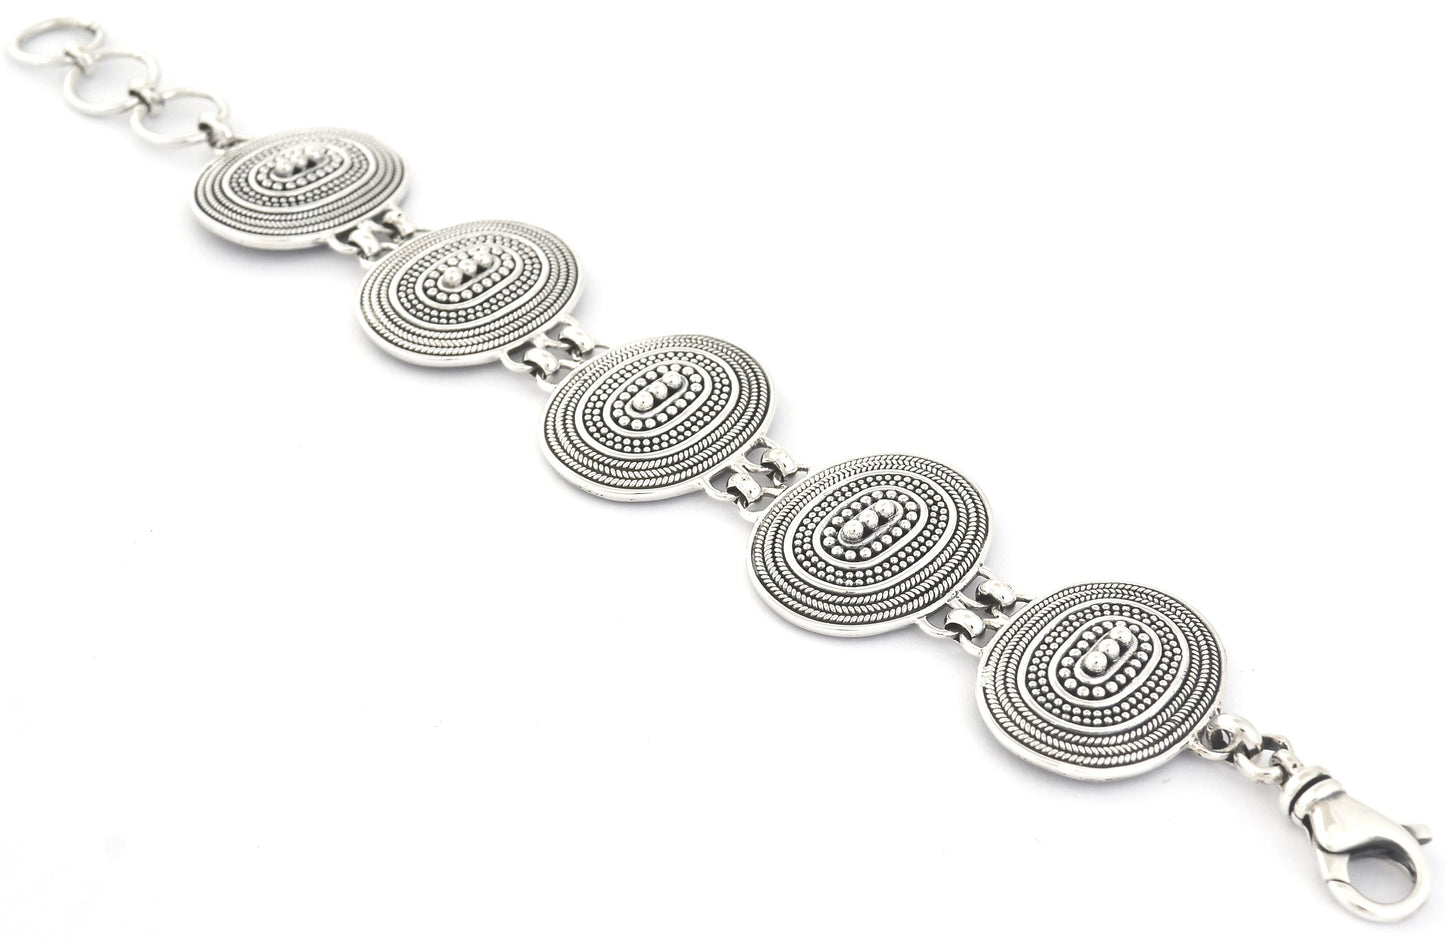 Silver bracelet laid out flat with oval link stations.